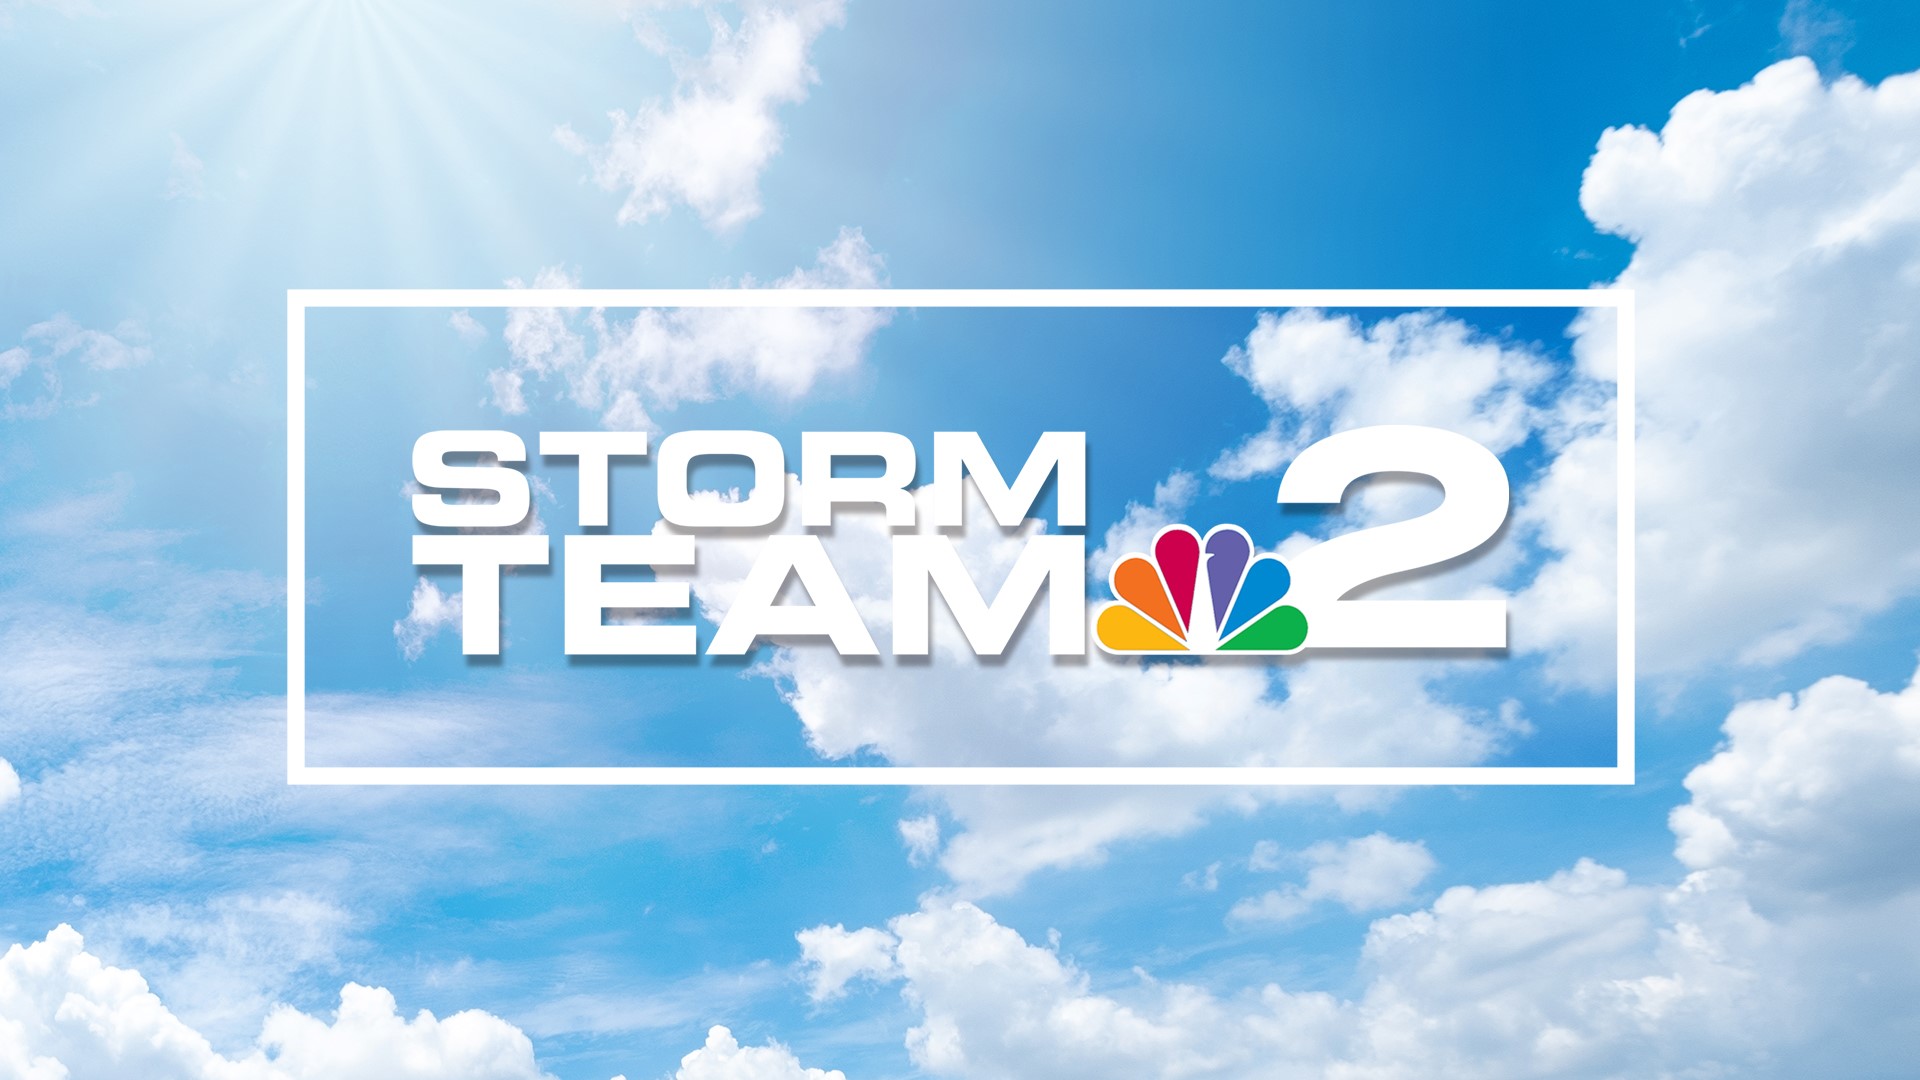 Storm Team 2 has your forecast to start your weekend.